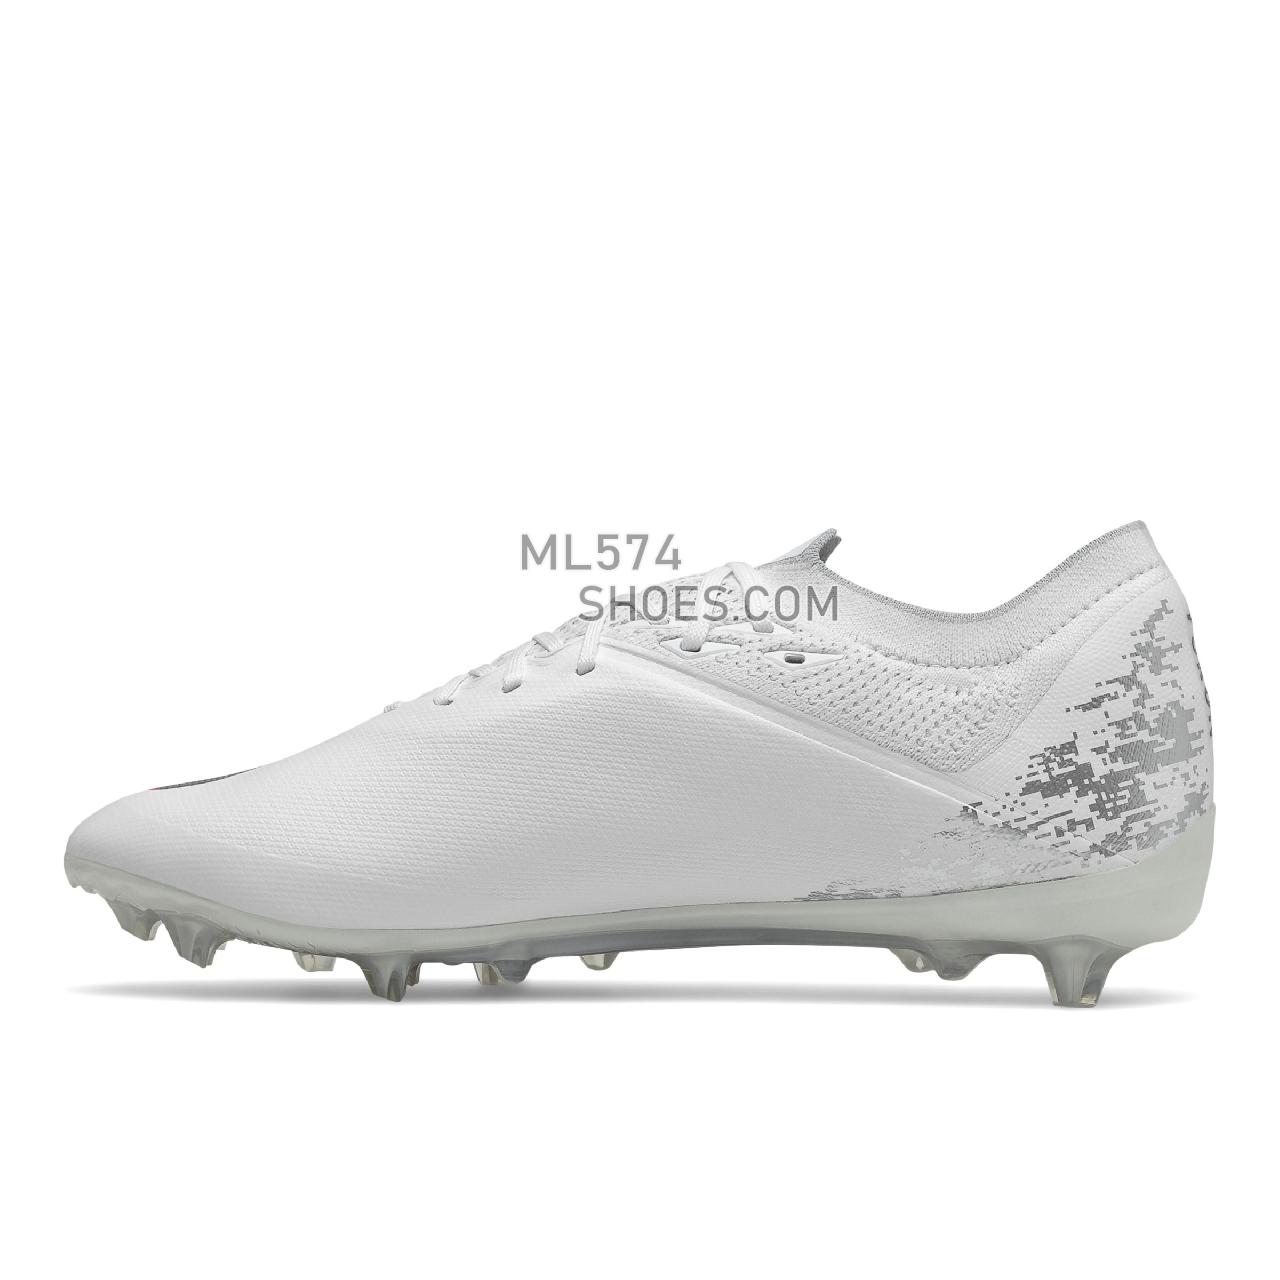 New Balance Furon V6+ Destroy FG - Men's Soccer - White with Silver and Alpha Pink - MSF2FP65